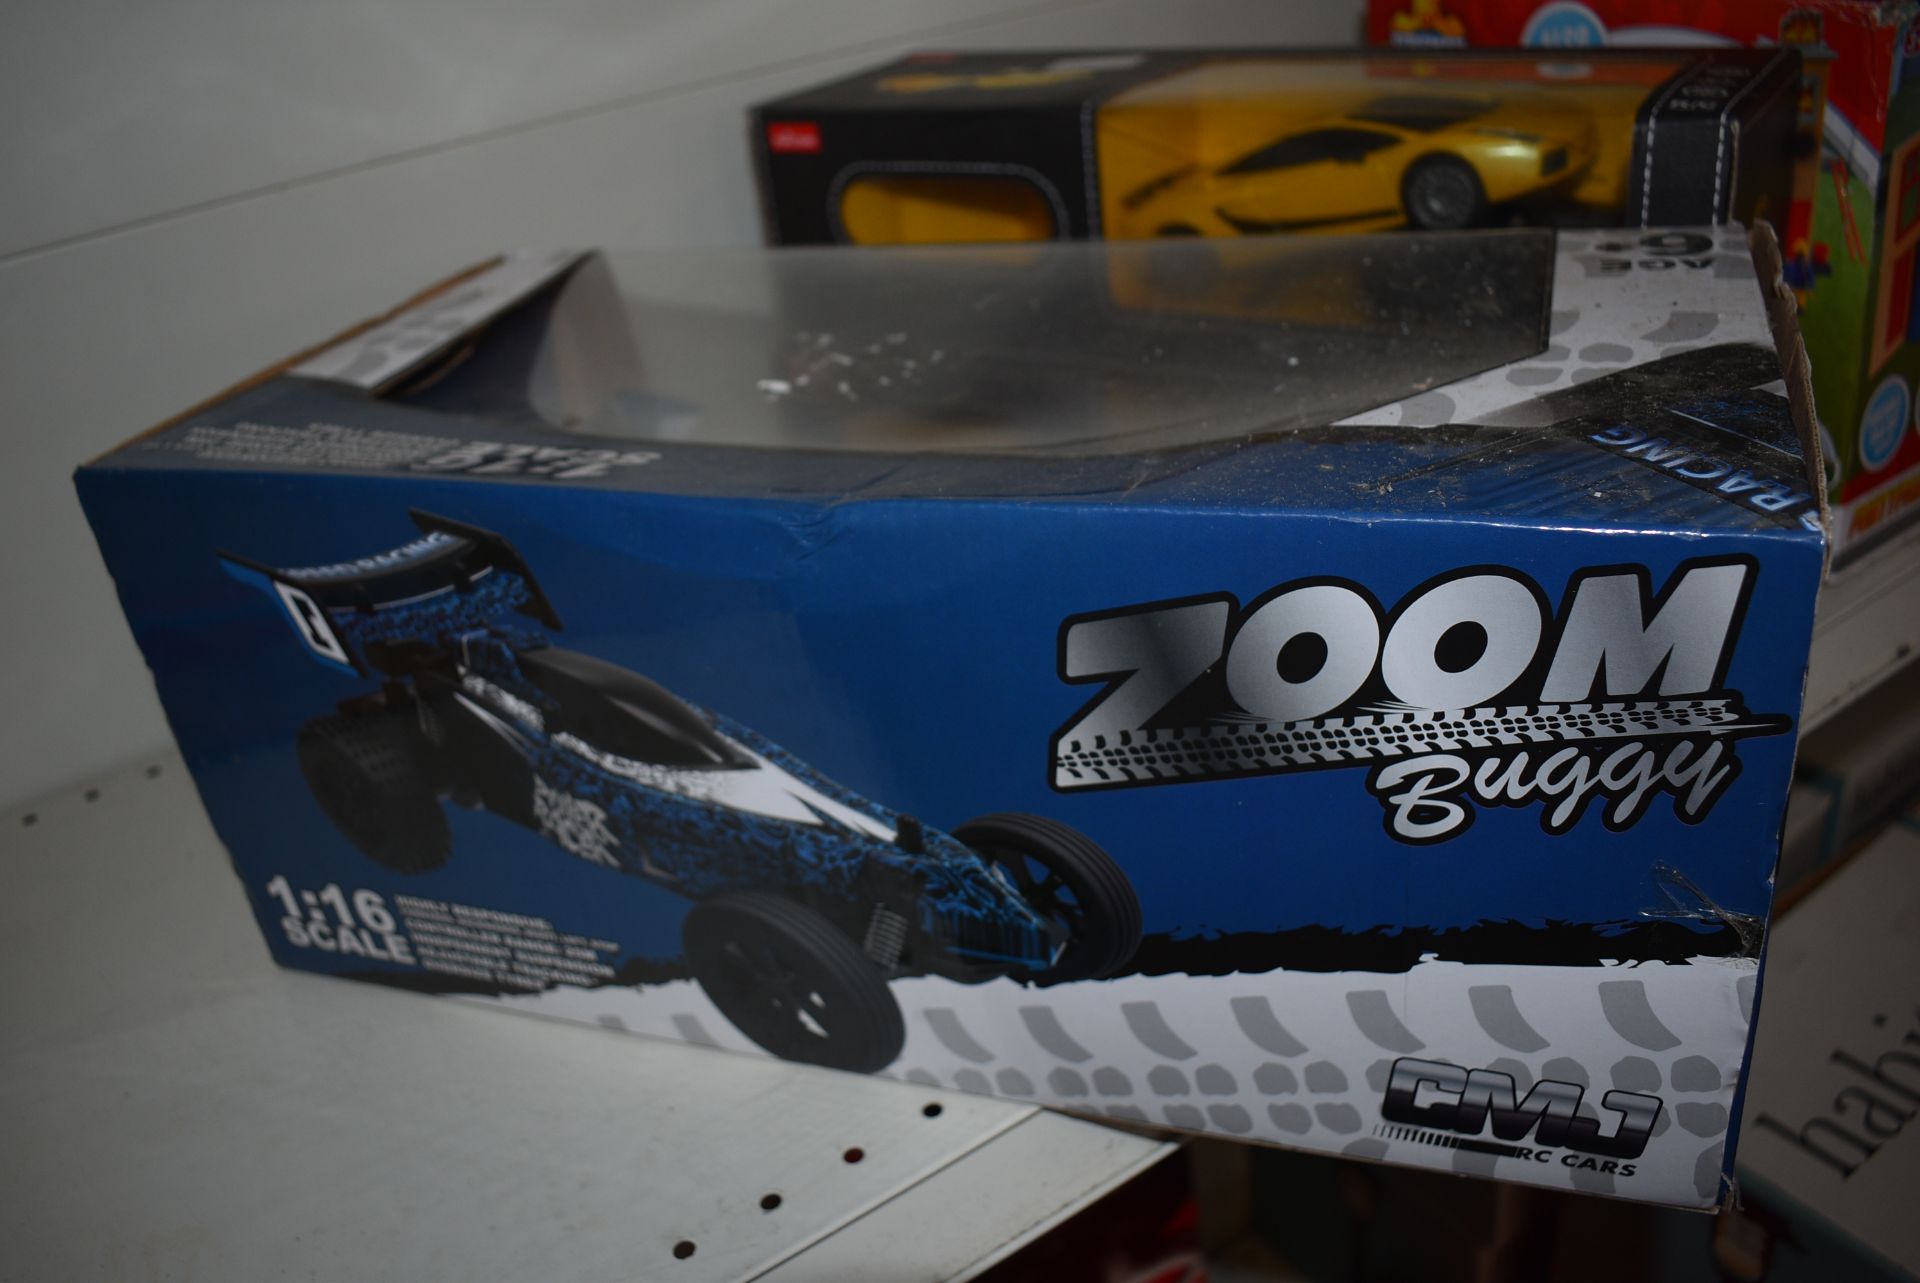 Zoom Remote Control Buggy - Image 4 of 4